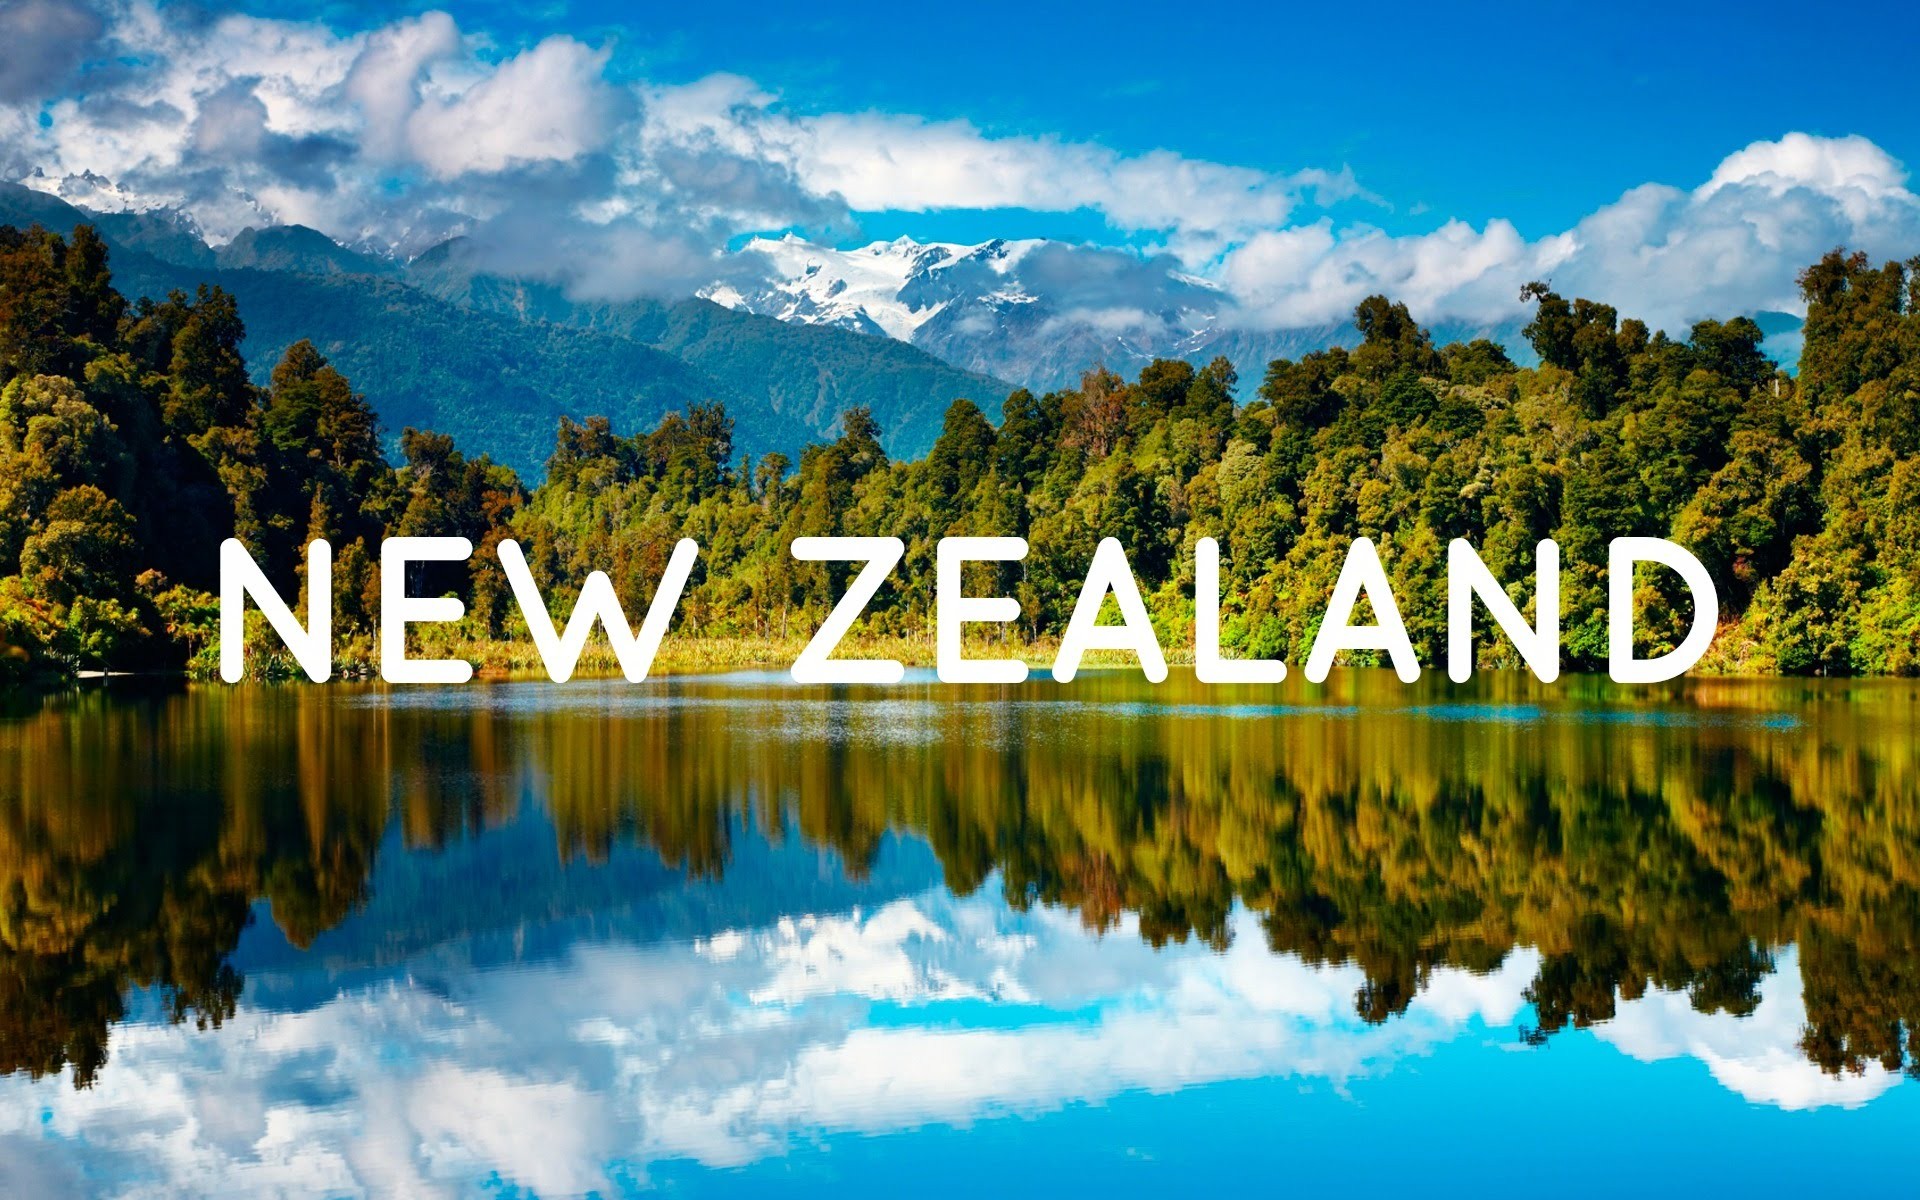 A stunning view of New Zealand